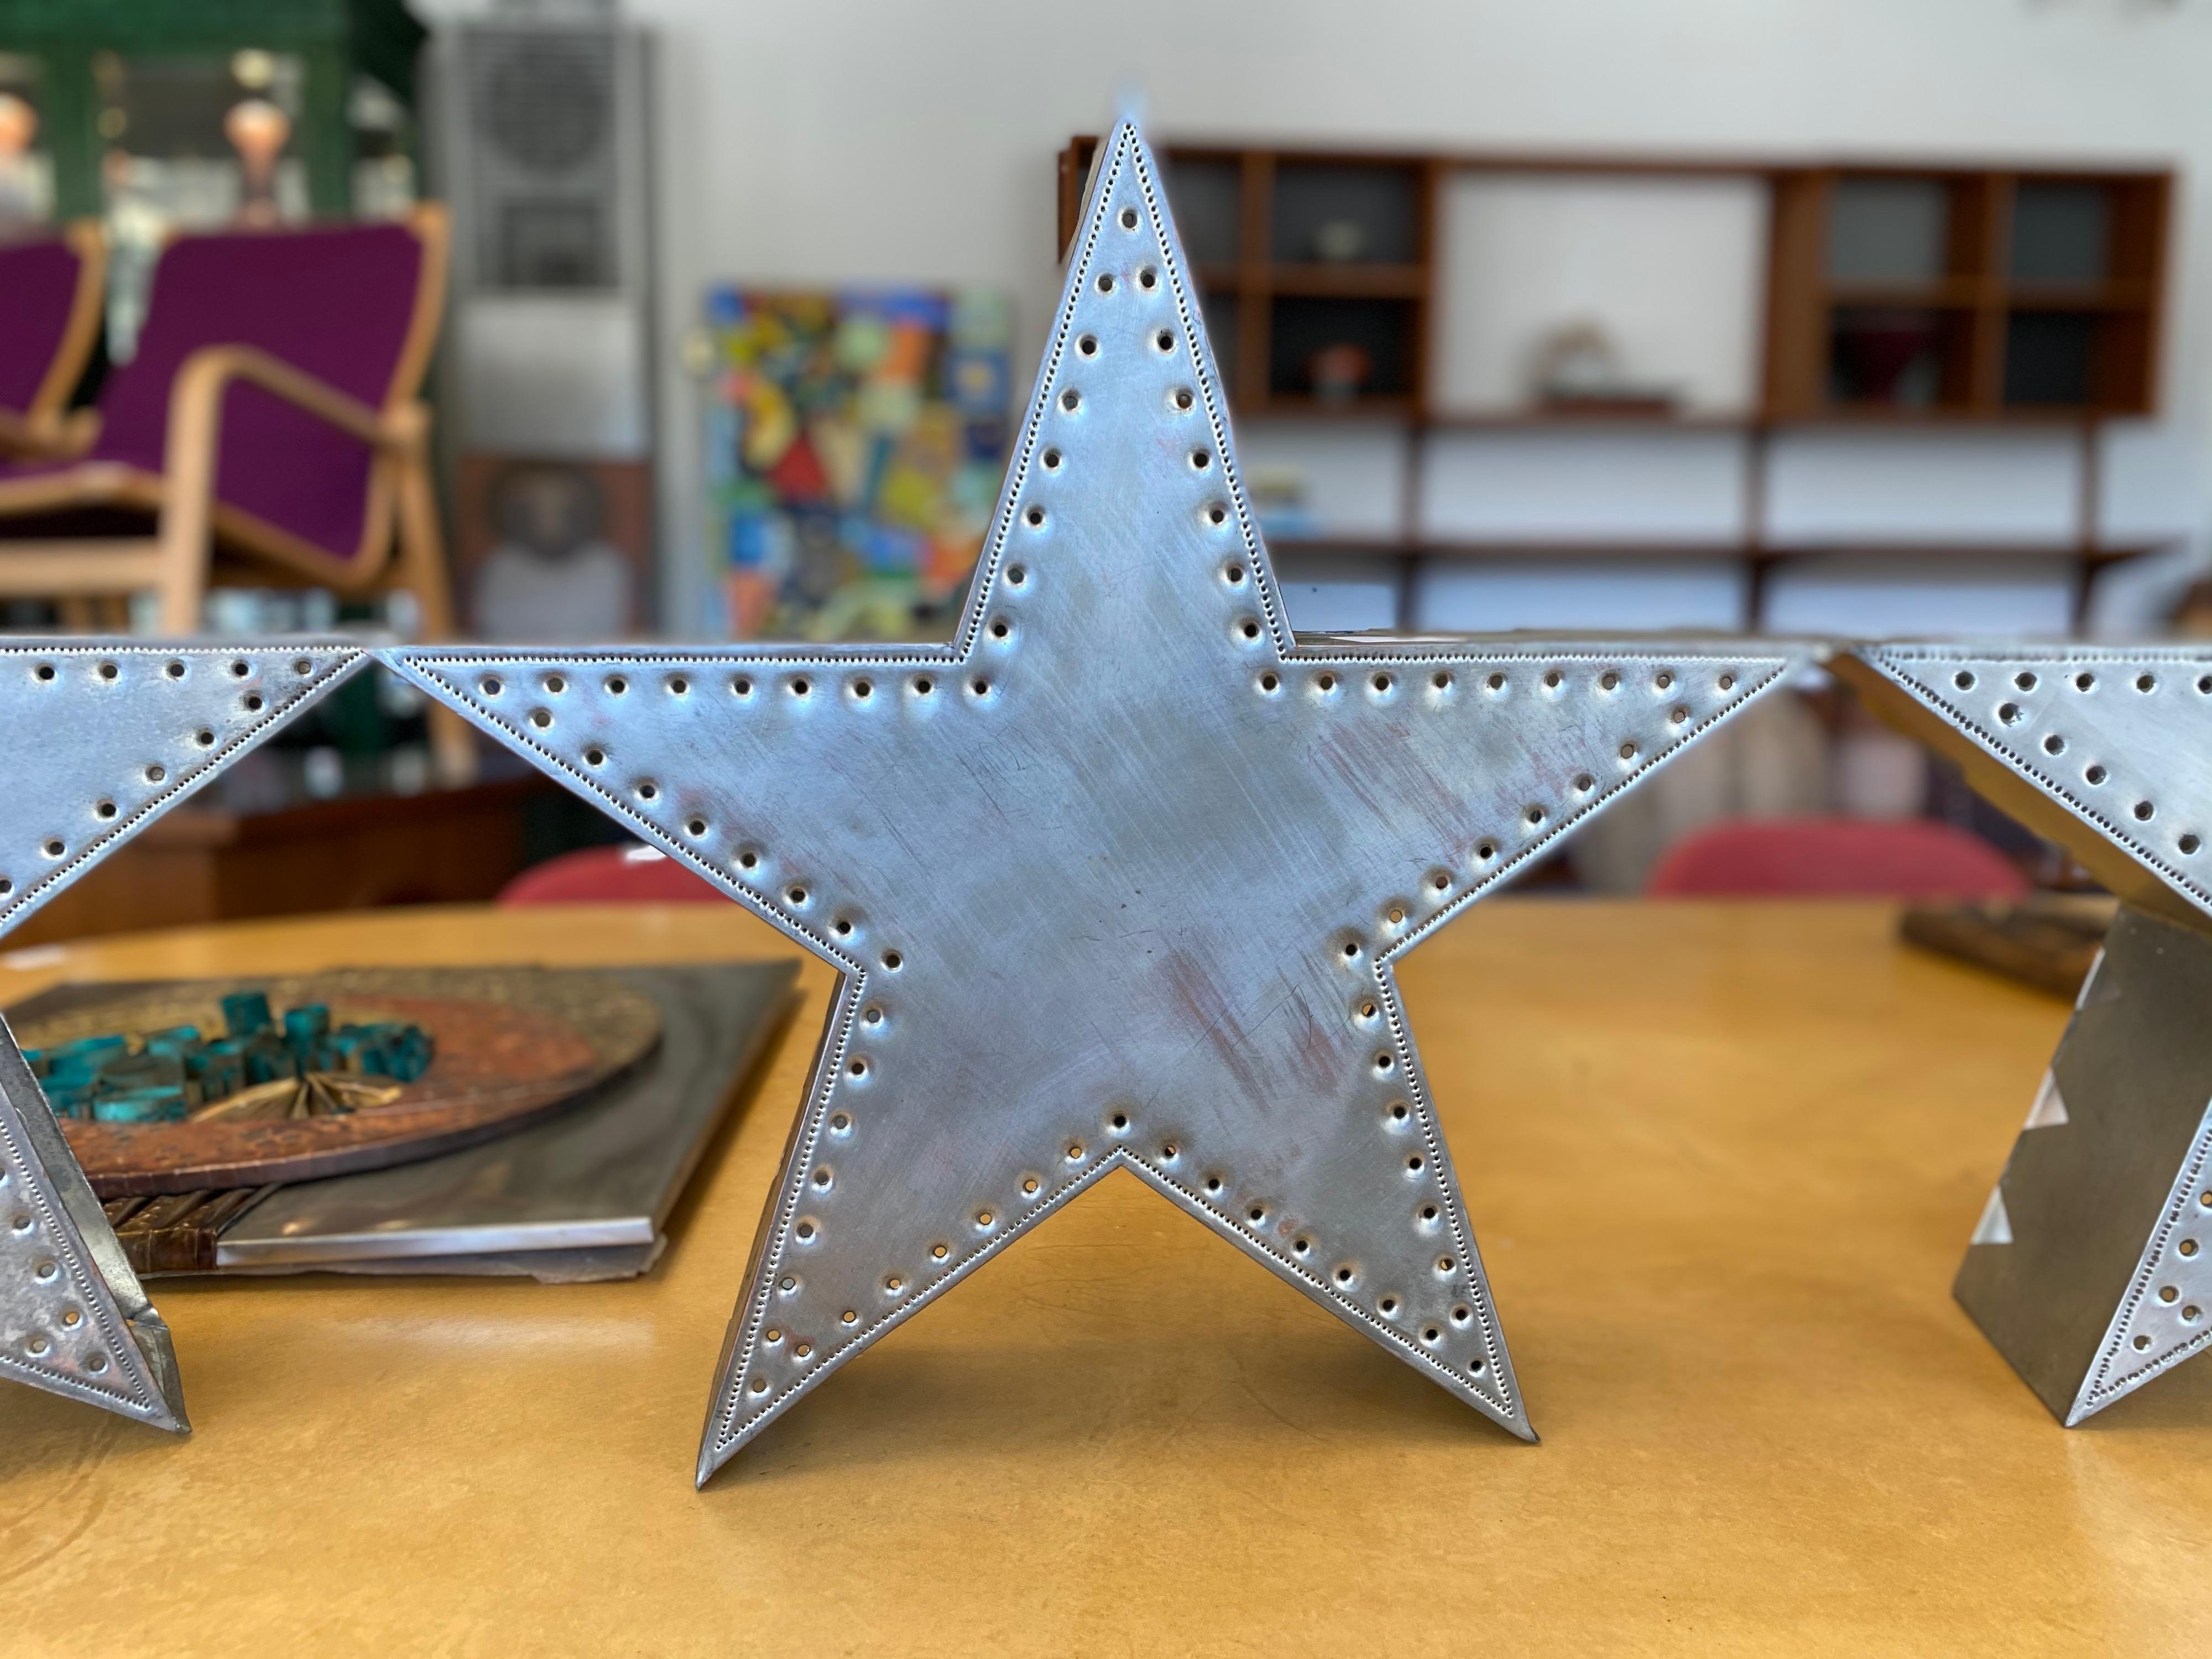 Beautiful architectural metal wall fixture designed by Isaac Maxwell Metal features a plated copper star pattern with punched holes that cast softly diffused light. Perfect for creating an ambiance. From Texas, Isaac Maxwell is known for his copper